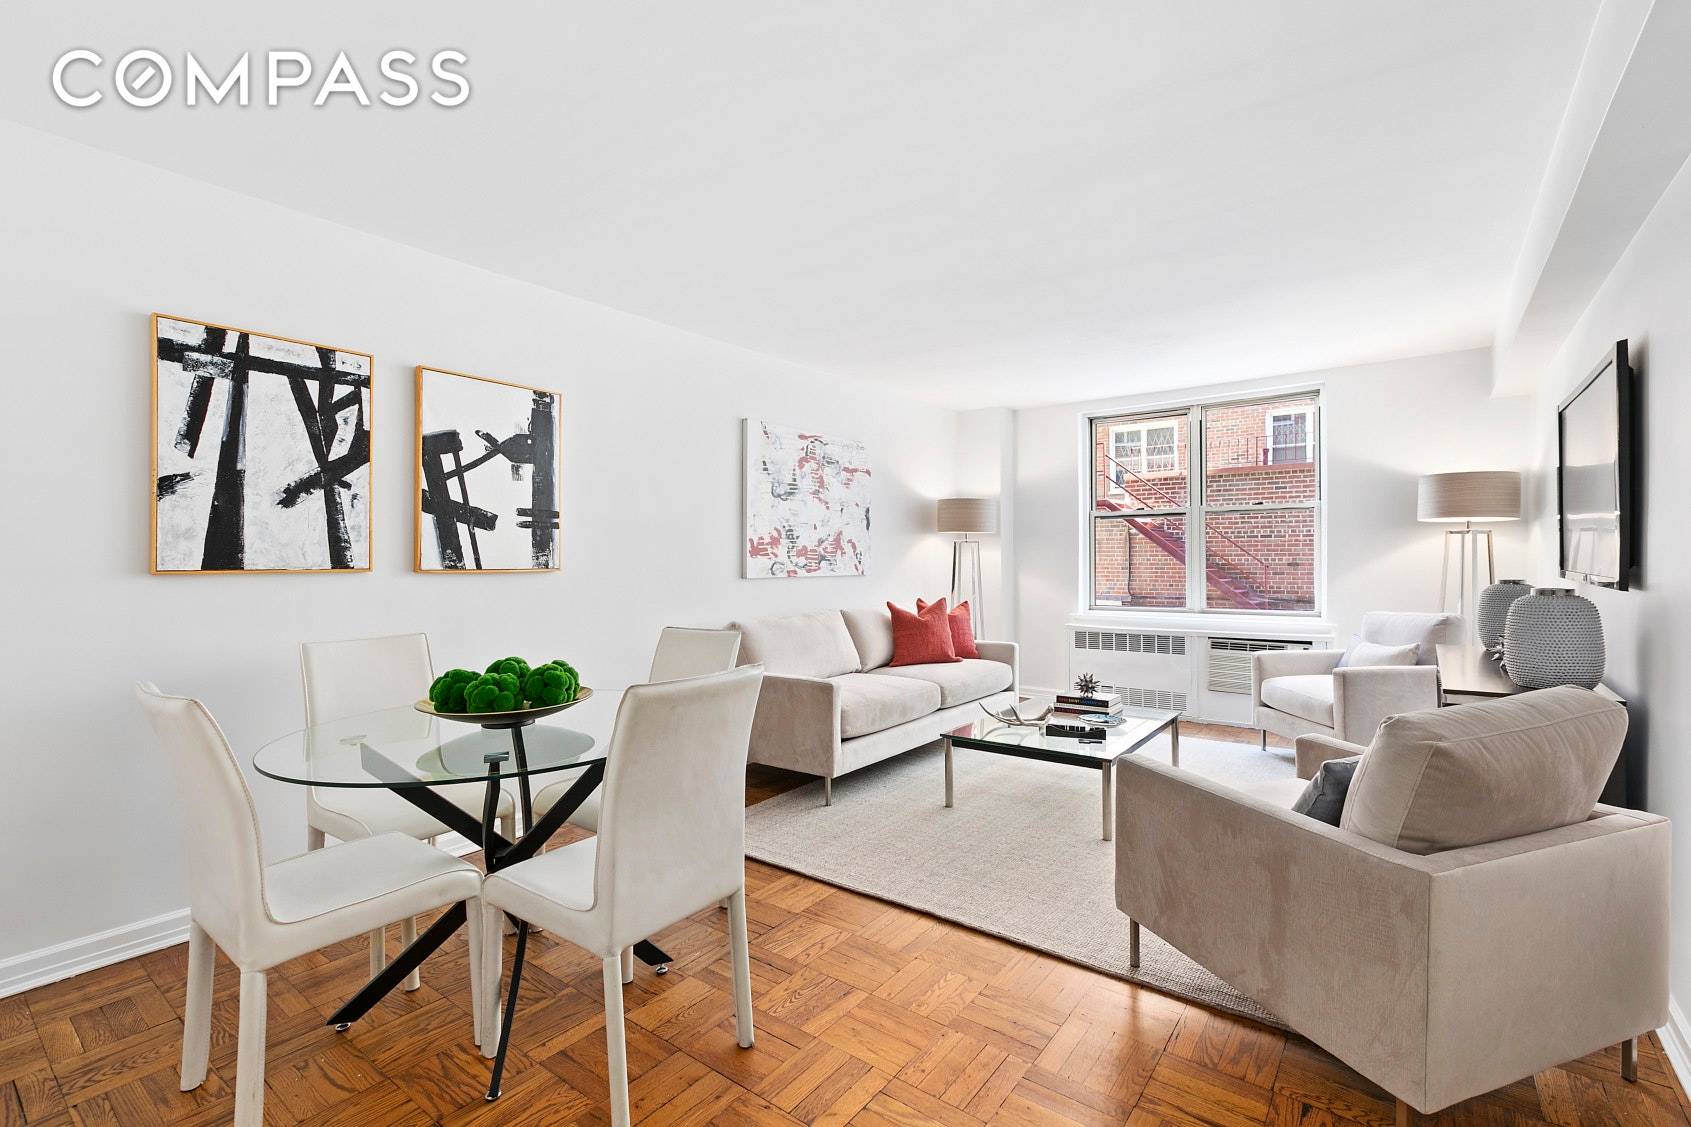 A beautifully renovated, spacious, and quiet one bedroom in a superb coop in prime Greenwich Village.